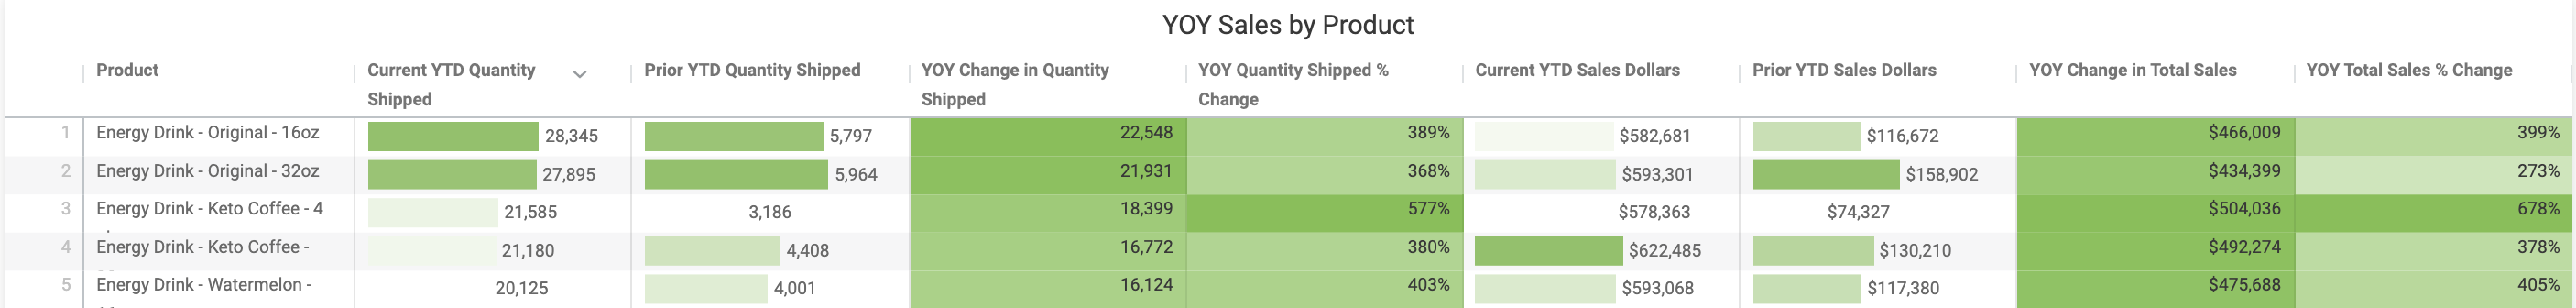 YOY_Sales_by_Product.png